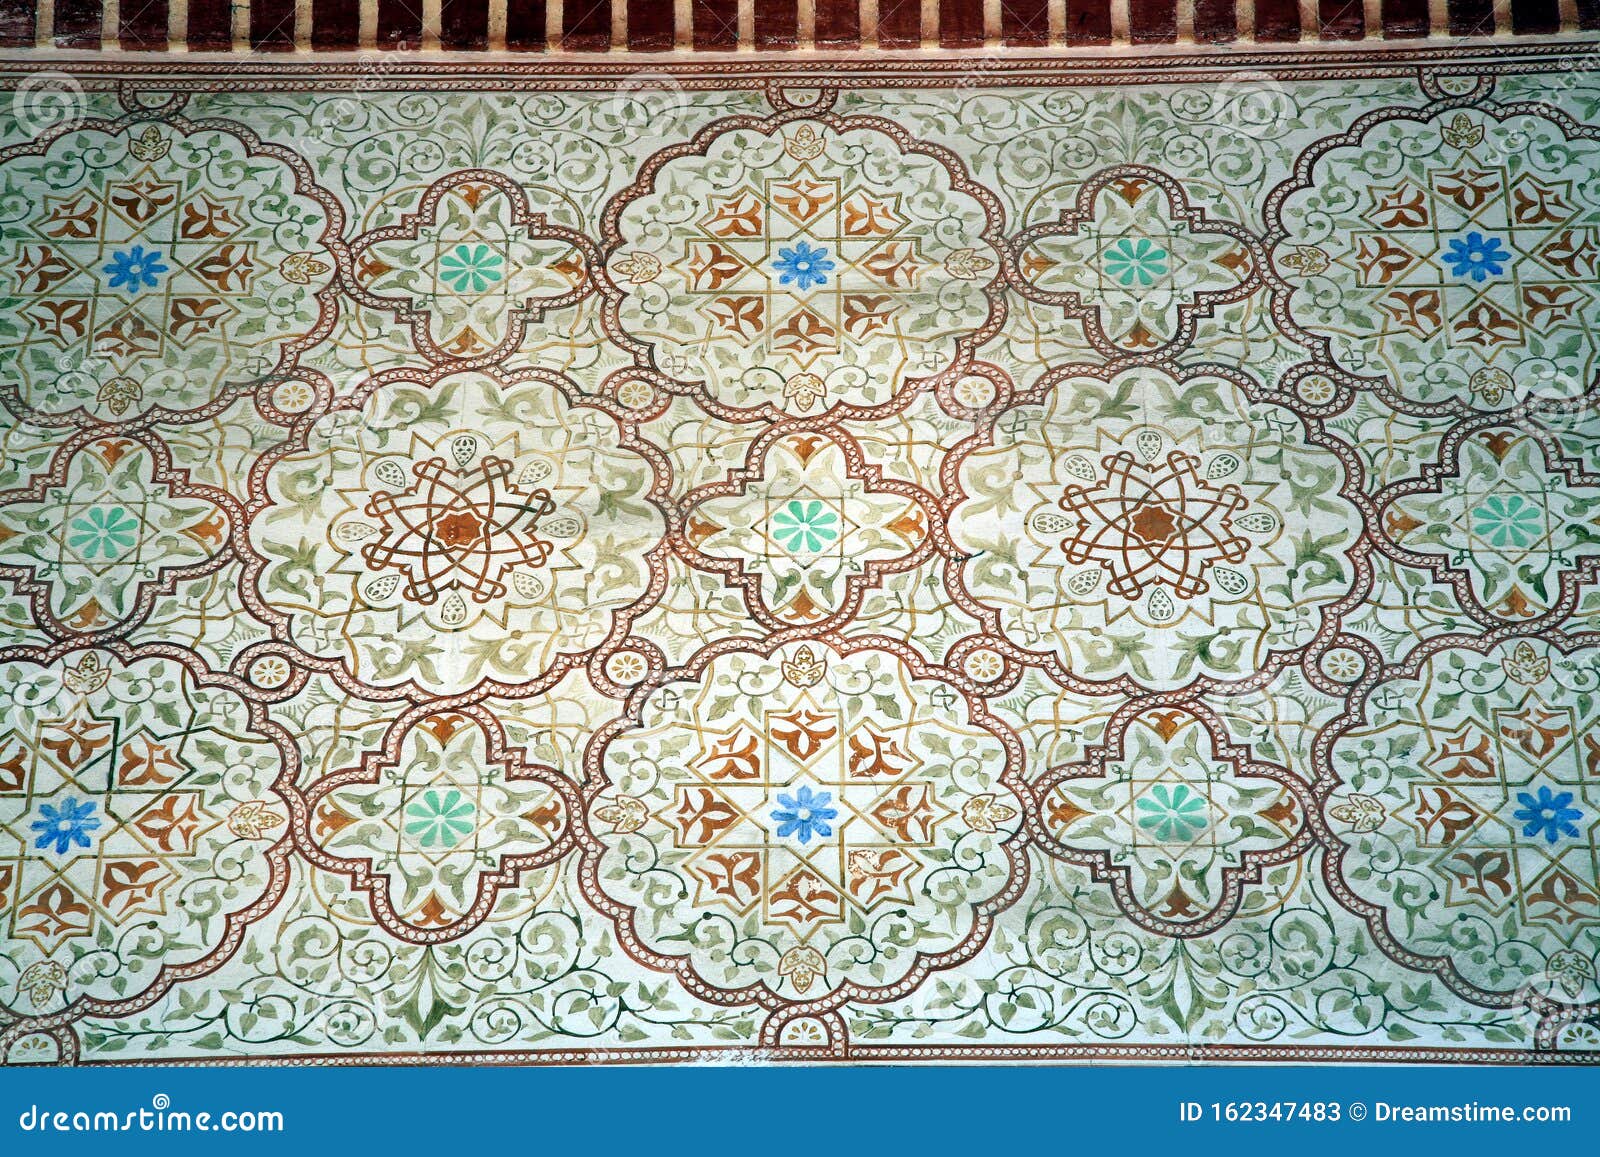 mosaic patterns in al andalus, malaga, andalusia, spain